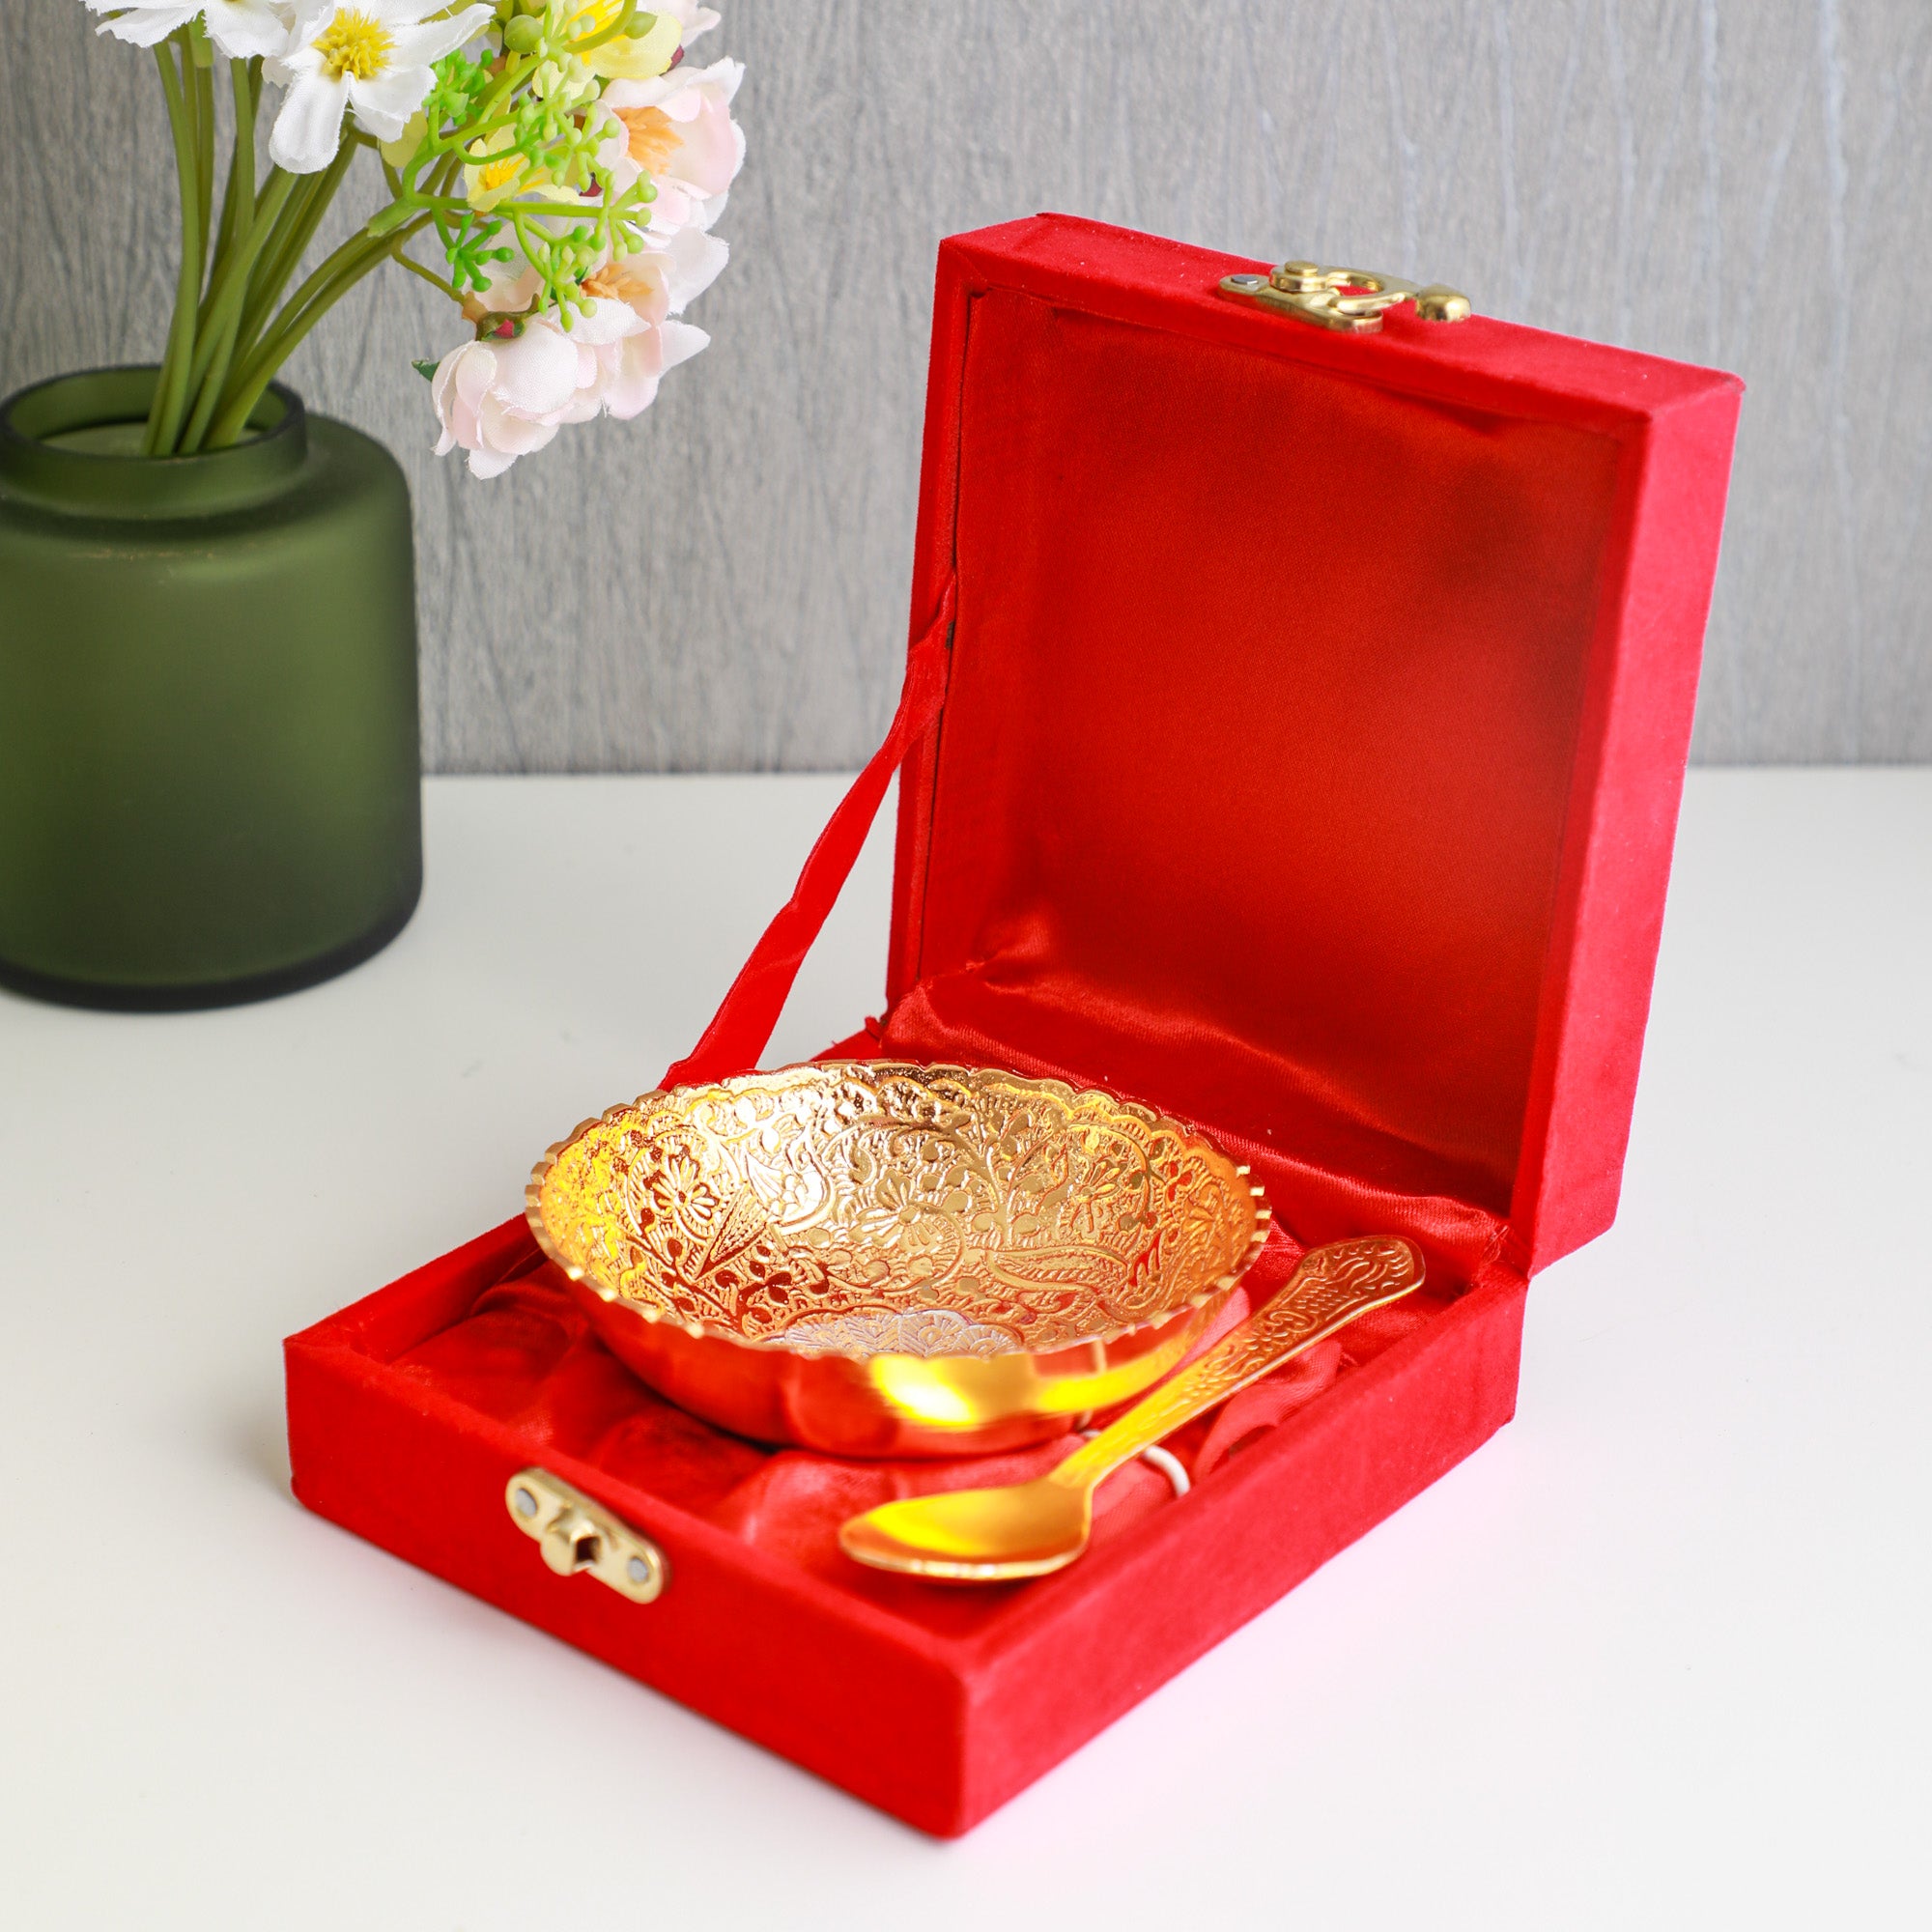 Red Box with Bowl and Spoon Return Gift ideas